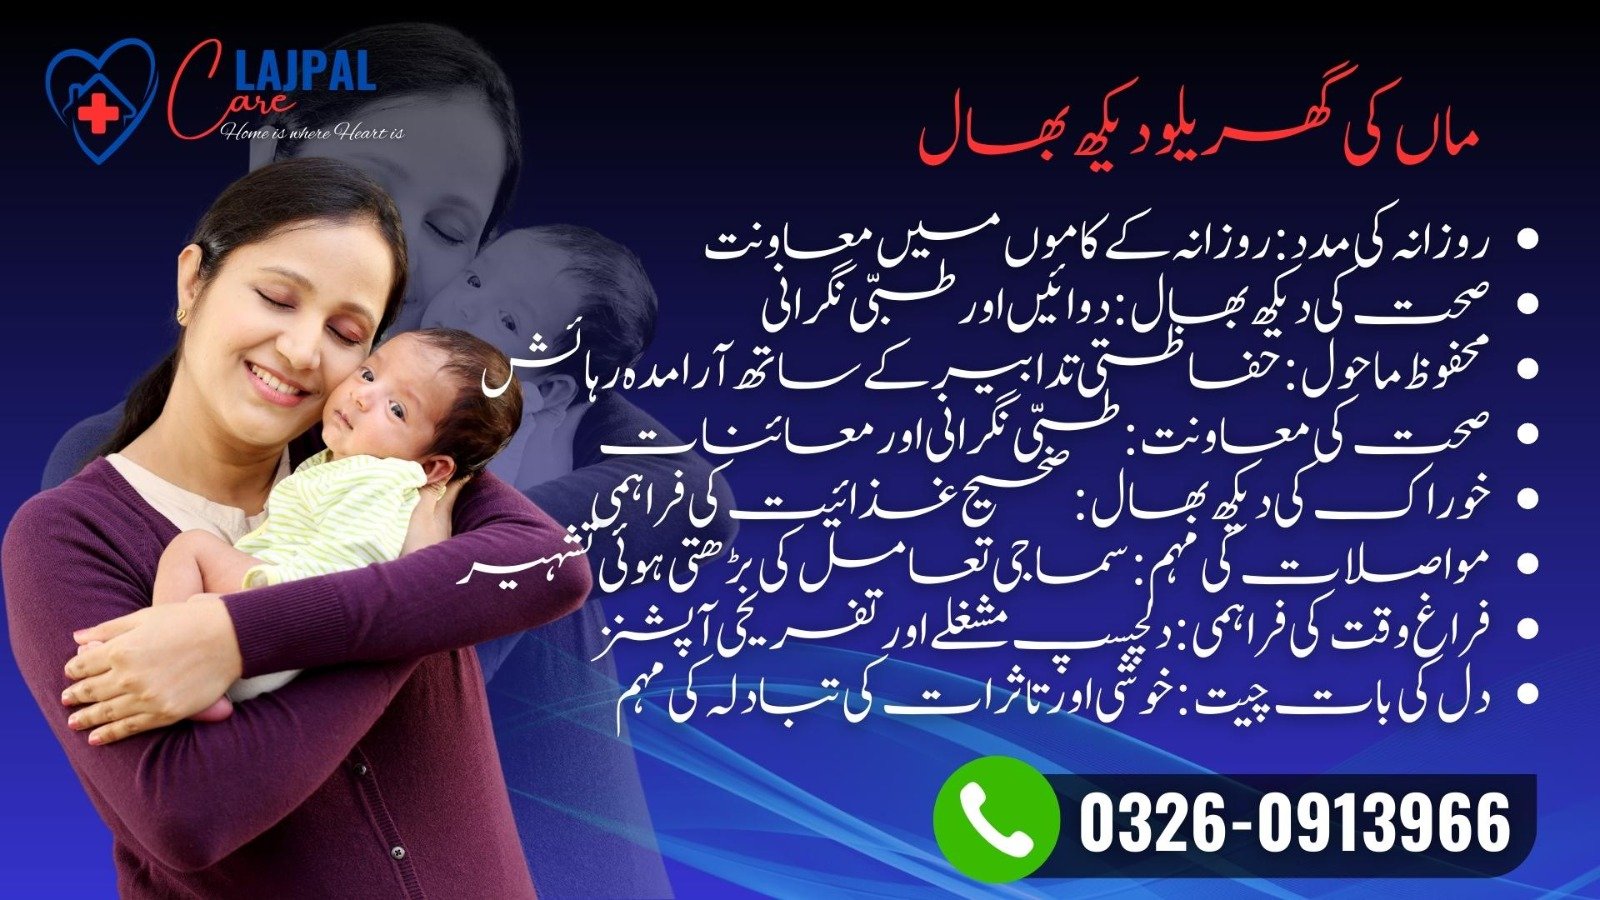 Home Mother and Baby Care Services in Islamabad and Rawalpindi